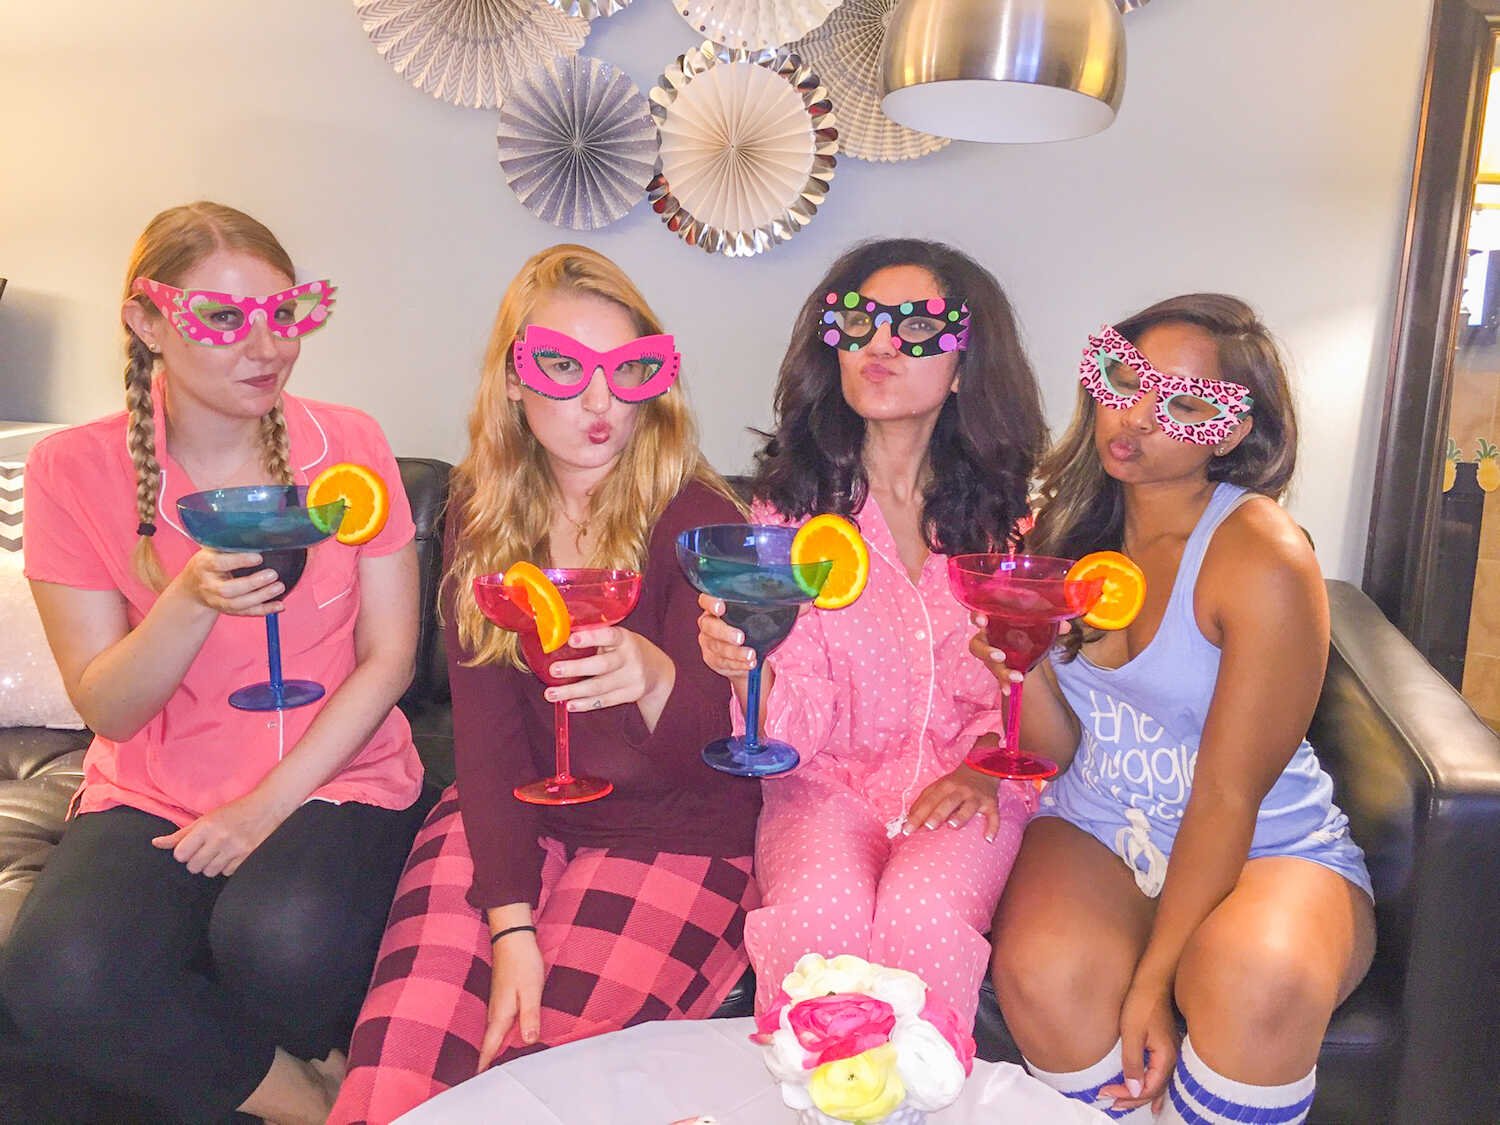 How To Plan A Pajama Party That You And Your Friends Will Enjoy